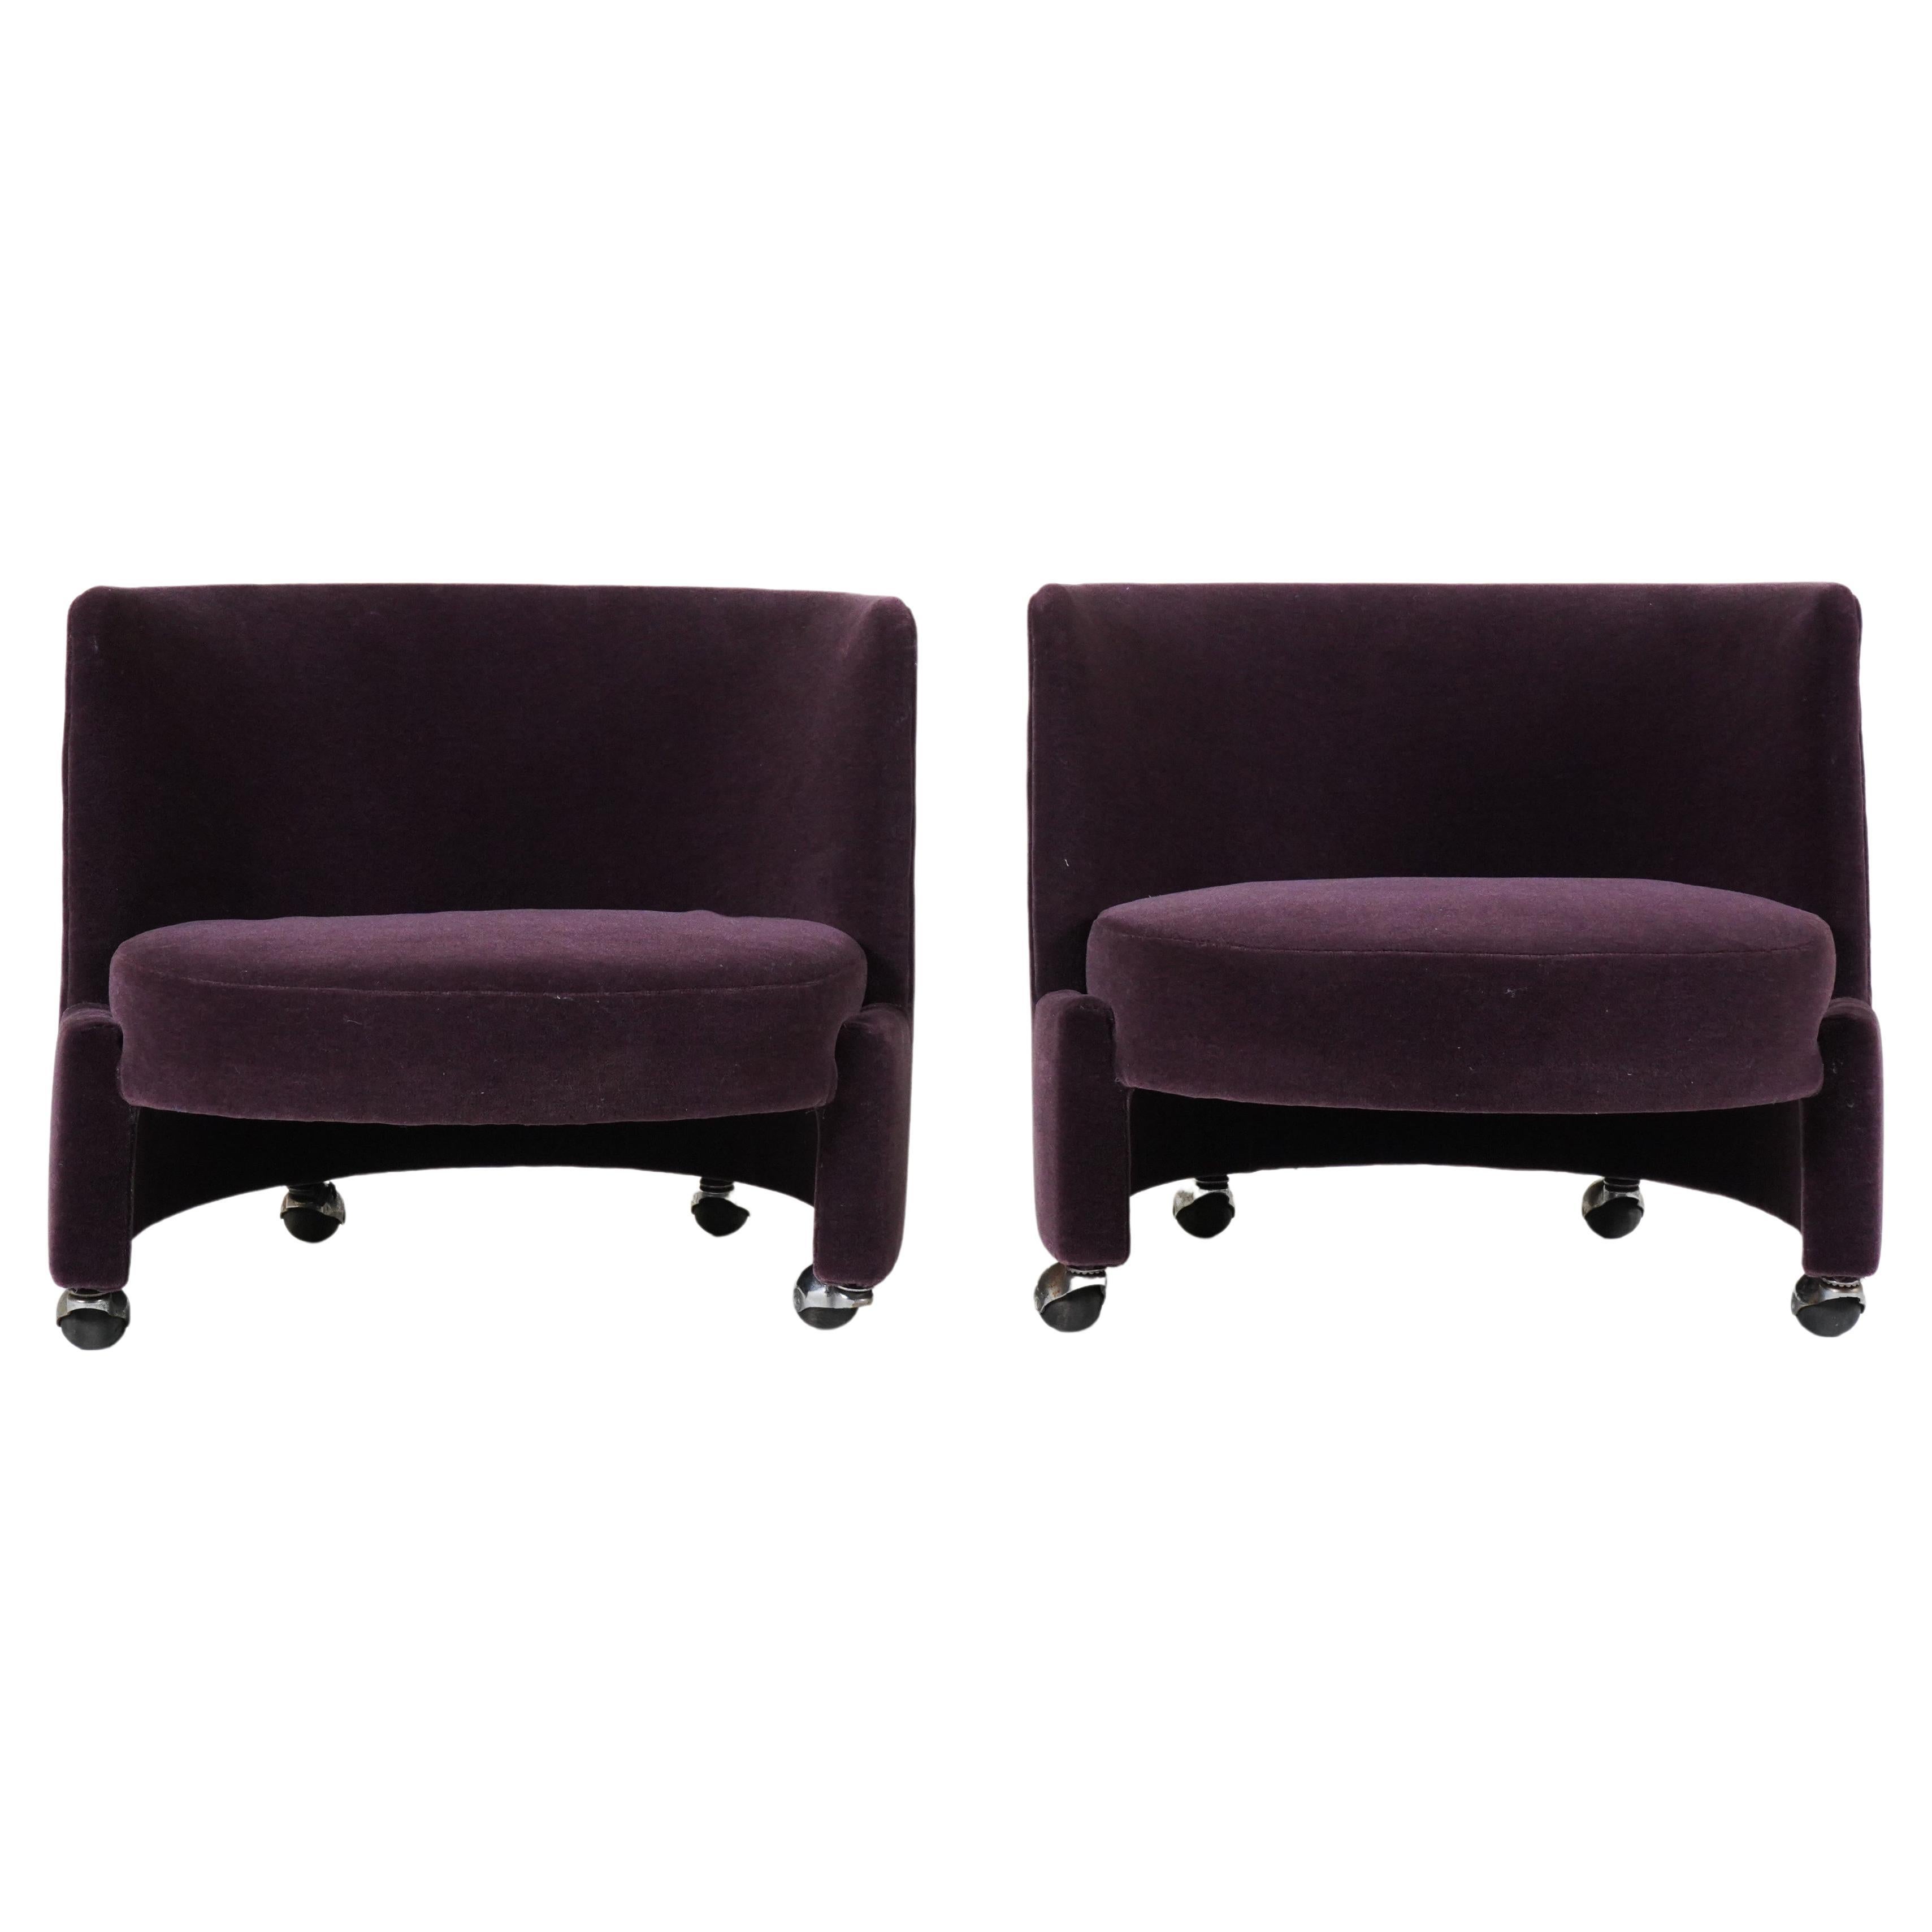 A Pair of Petite Mid-Century Socialist Lounge Chairs 